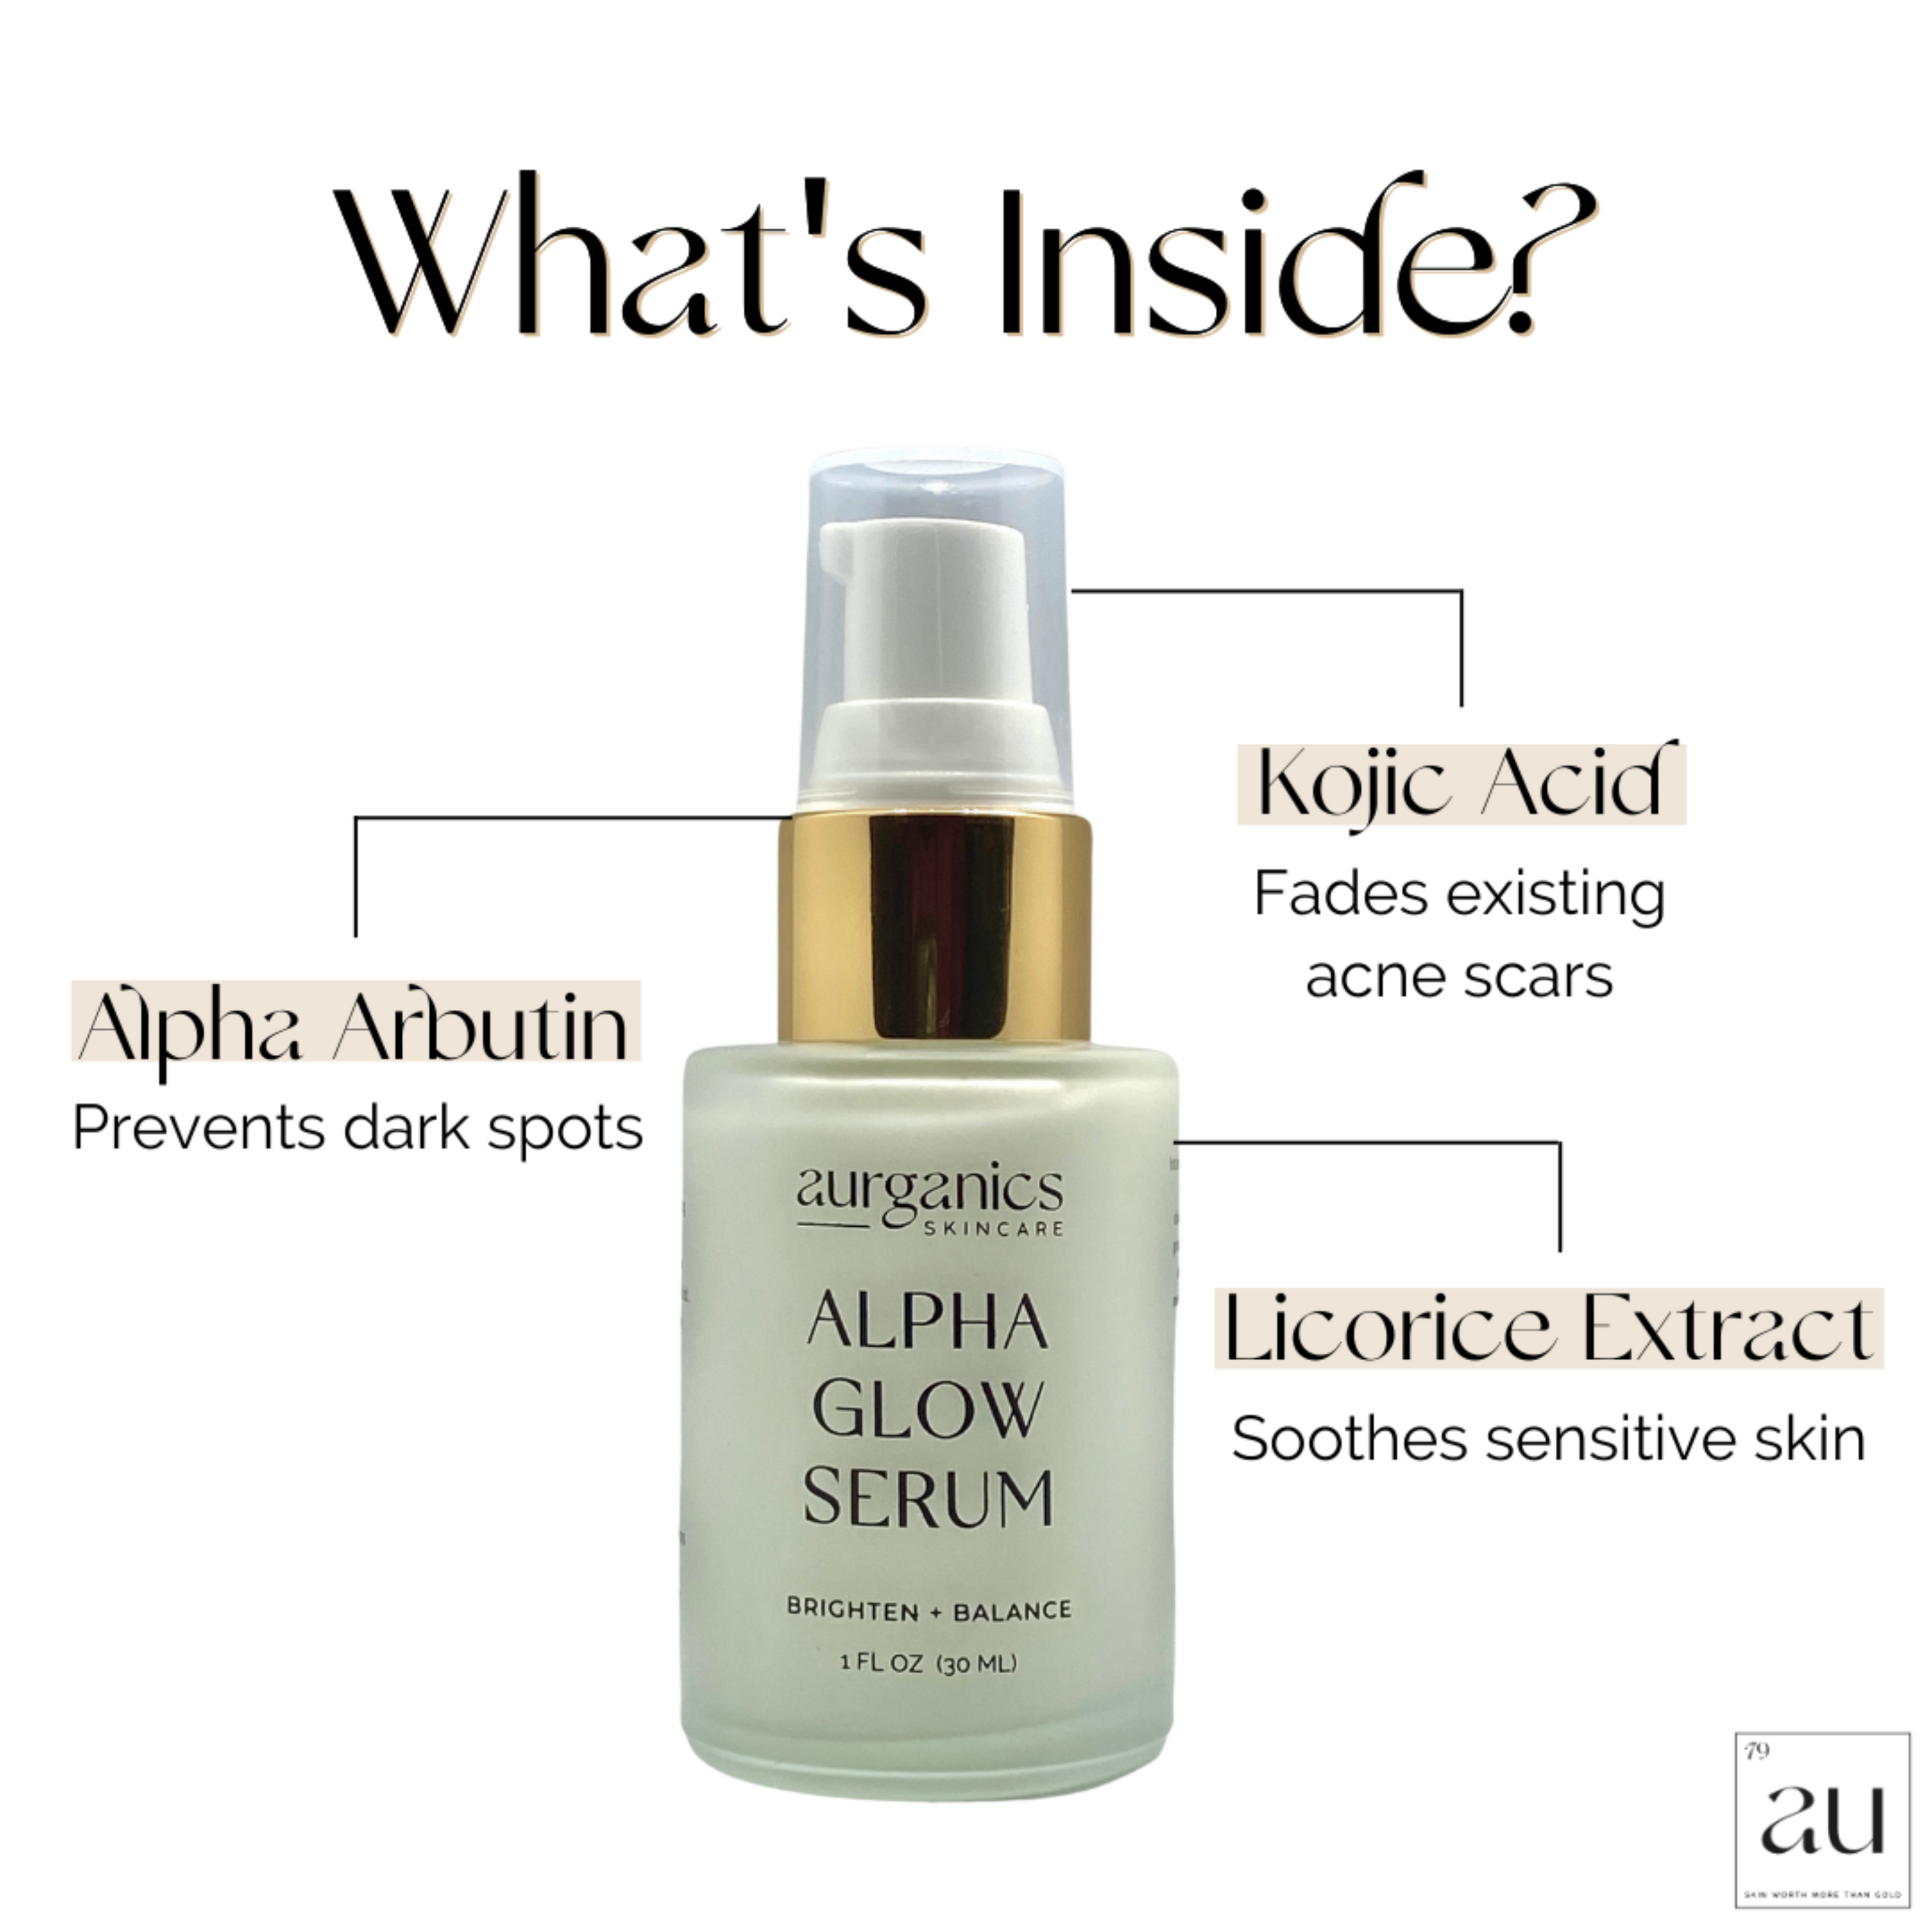 What's inside our Alpha Glow Serum? Alpha arbutin prevents dark spots, kojic acid fades existing acne scars, licorice extract soothes sensitive skin